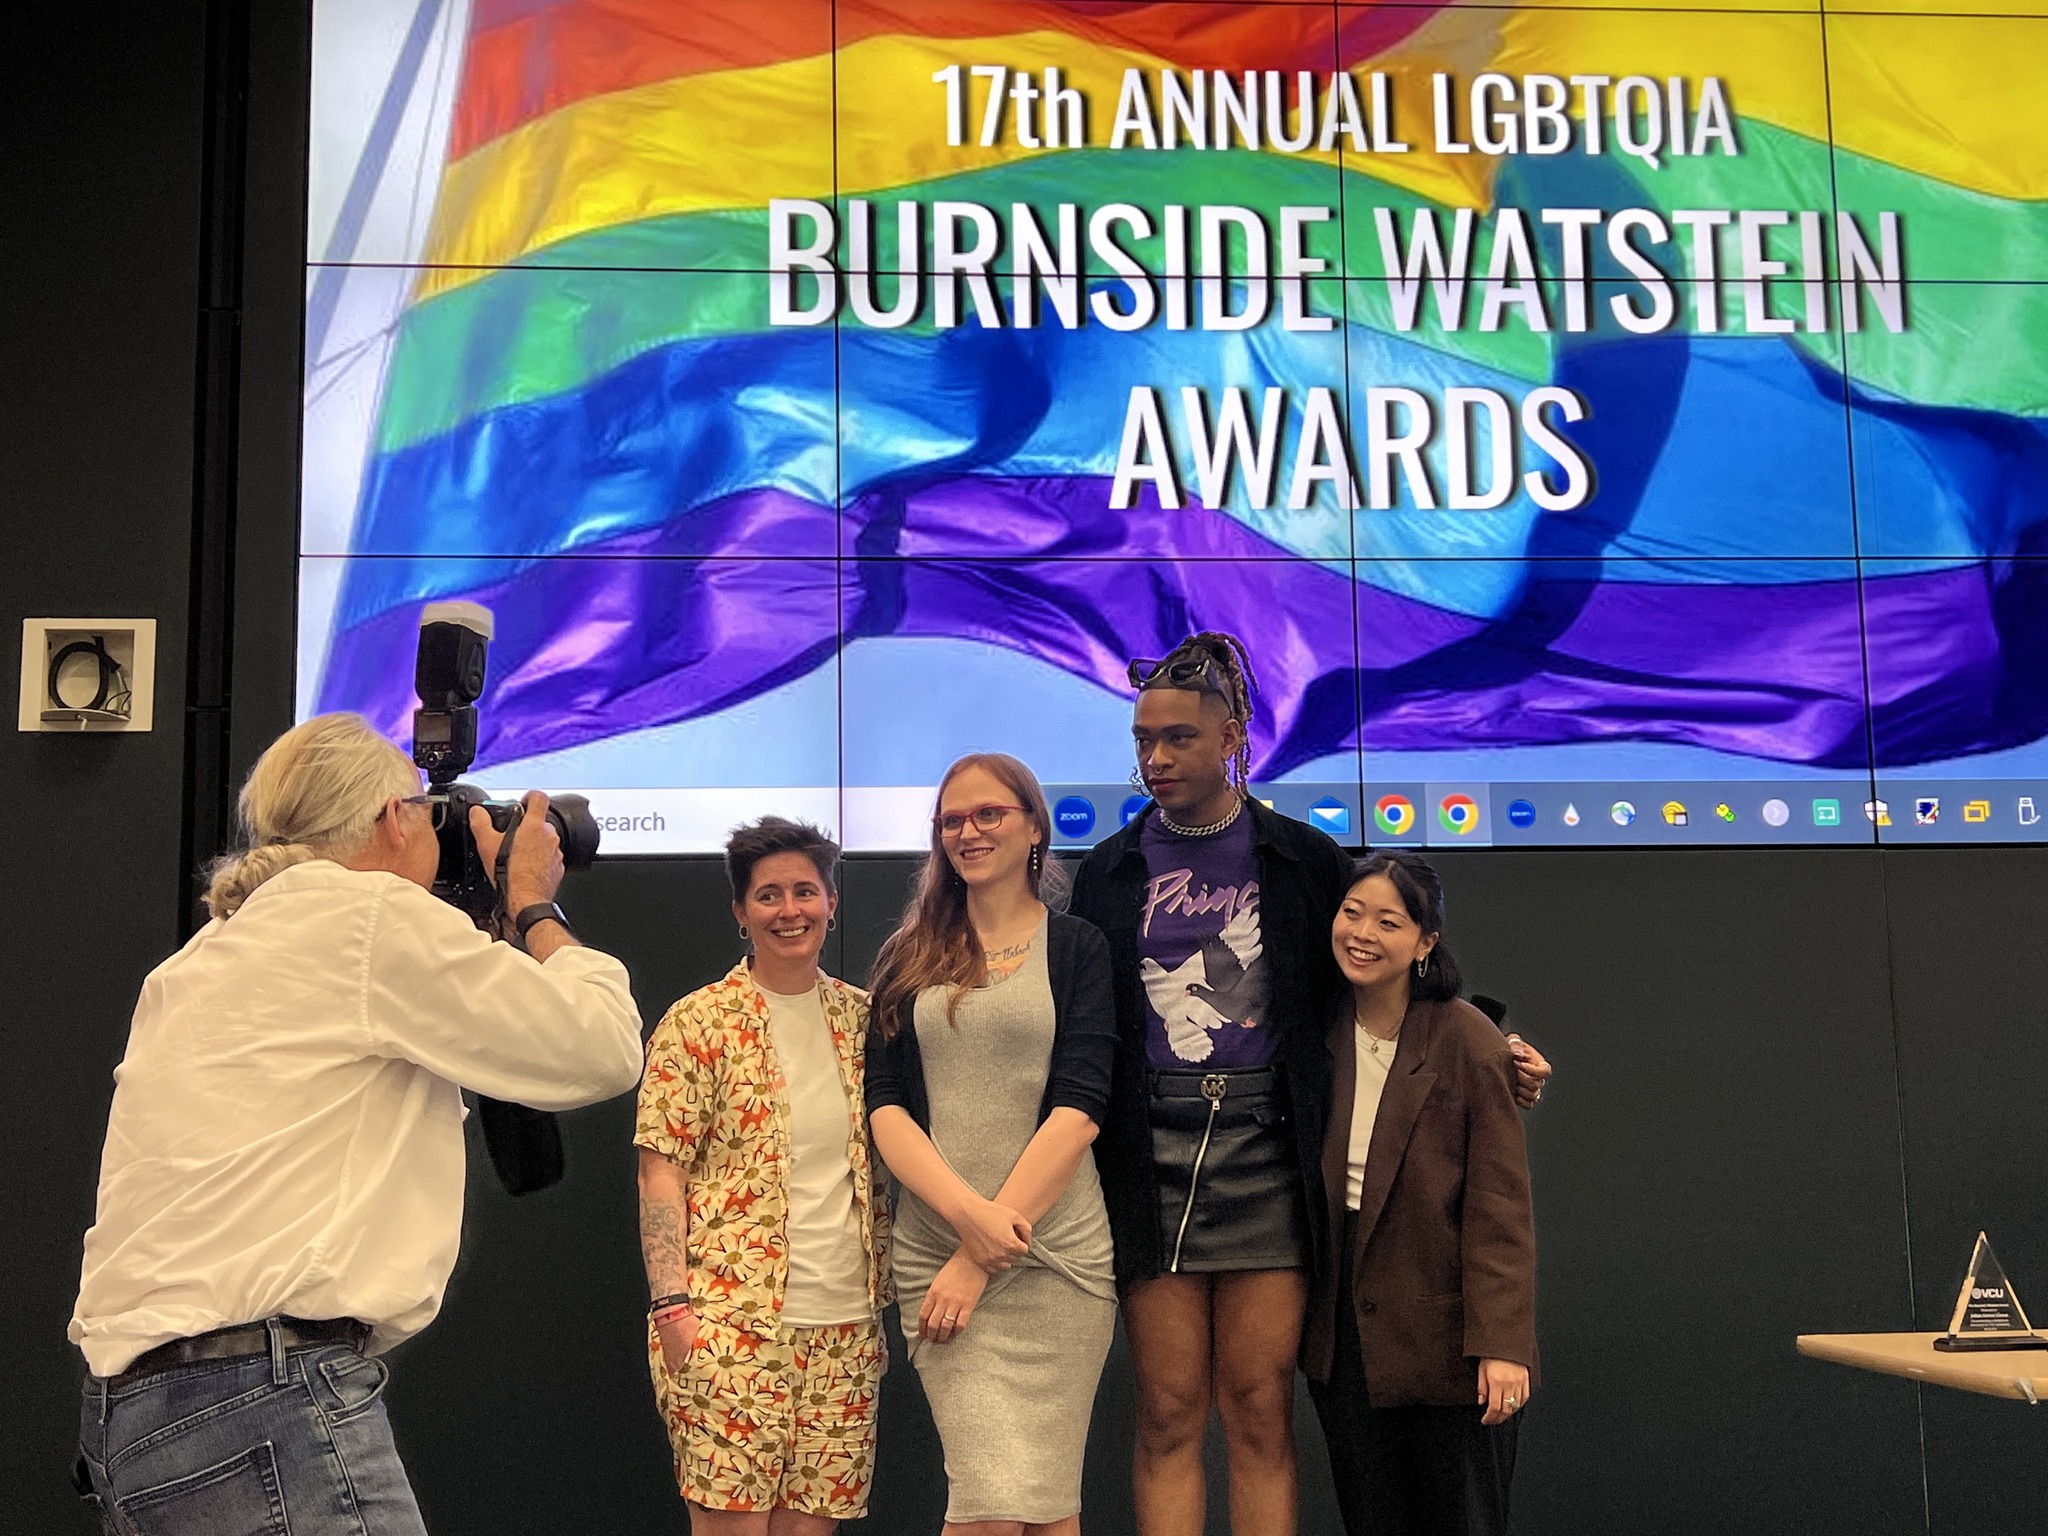 A photographer takes pictures of the four winners of the 18th annual Burnside Watstein LGBTQIA Awards at VCU. Recipients are Van Vox (staff), Melissa-Irene Jackson (community/alum), Dr. Julian Kevon Glover (faculty) and Beck Oh (student). 